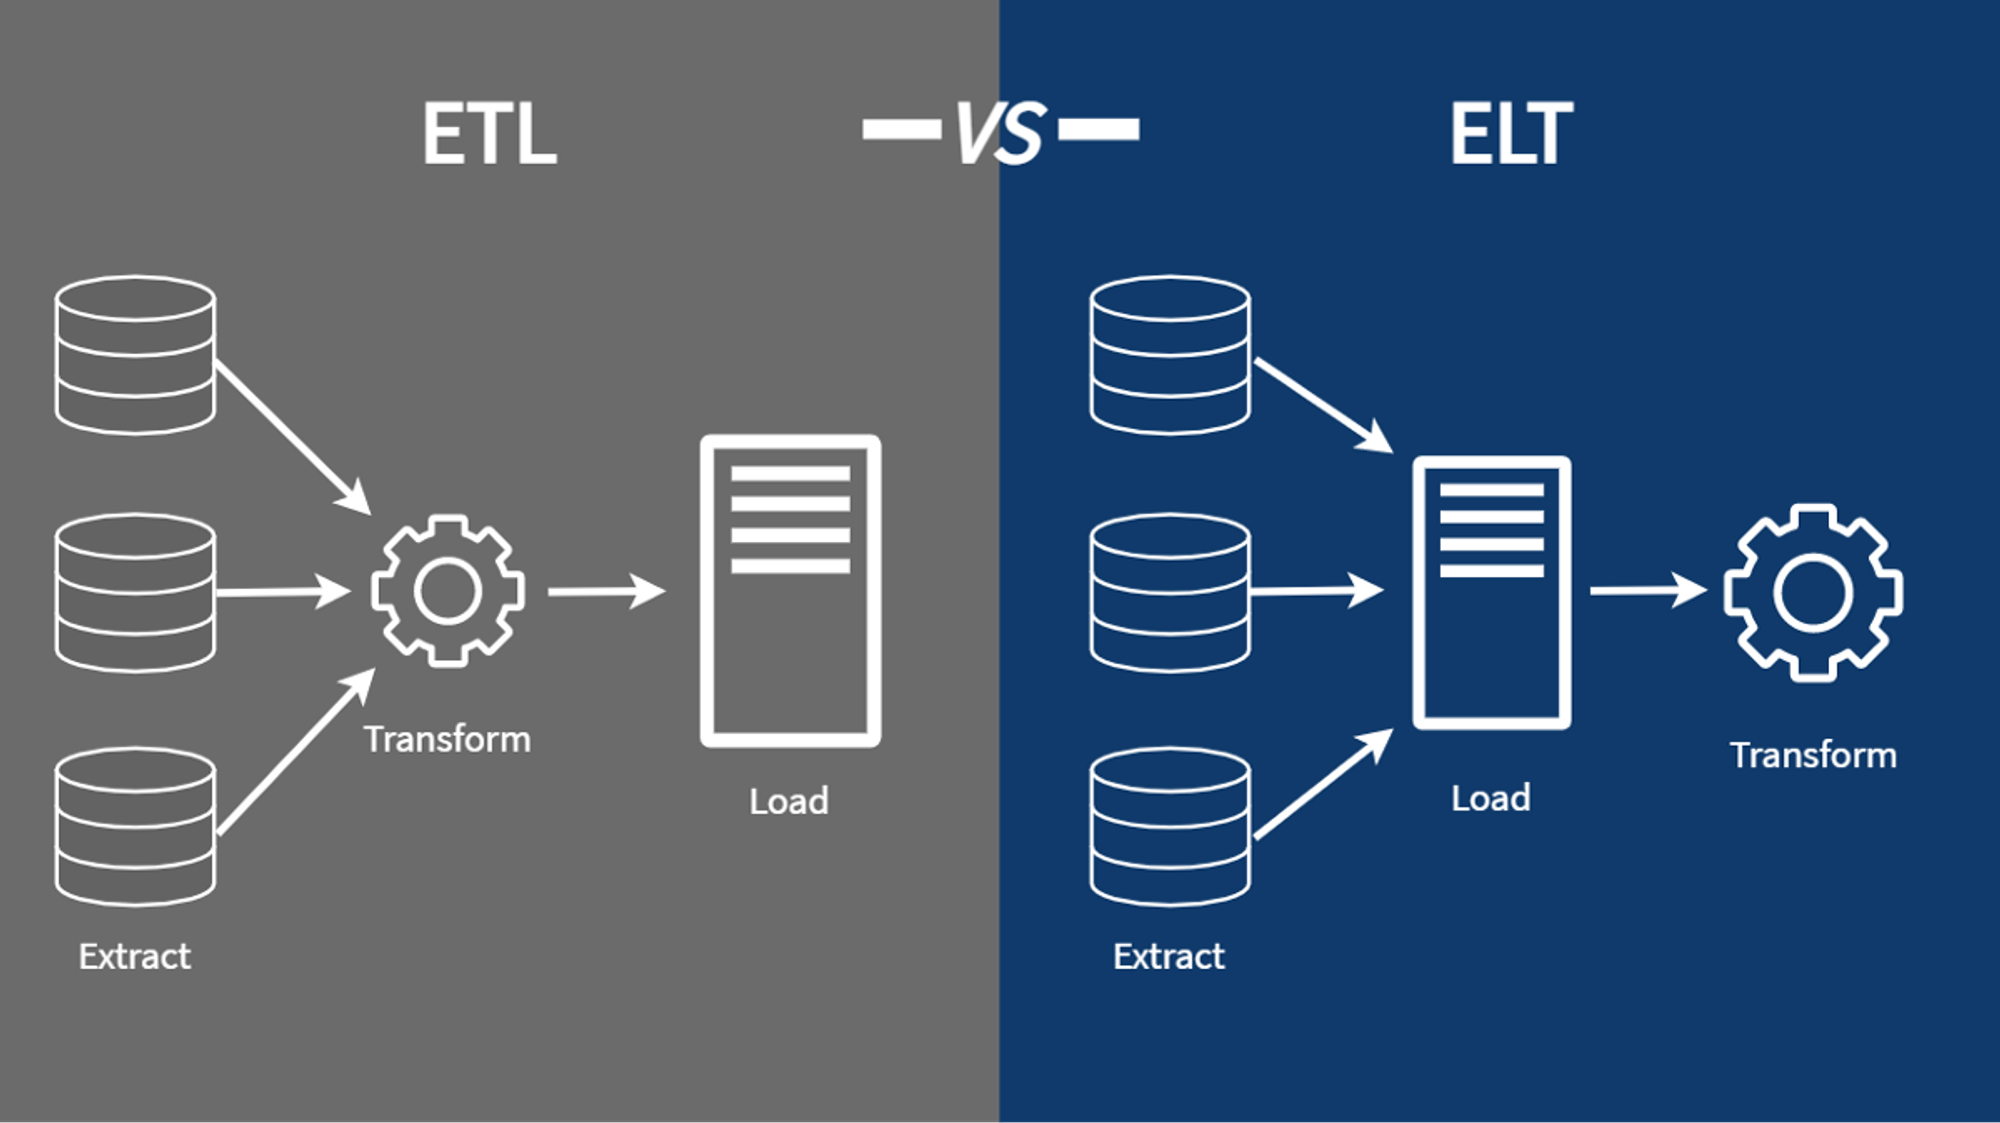 Difference between ETL and ELT. Picture borrowed from Nicholas Leong.